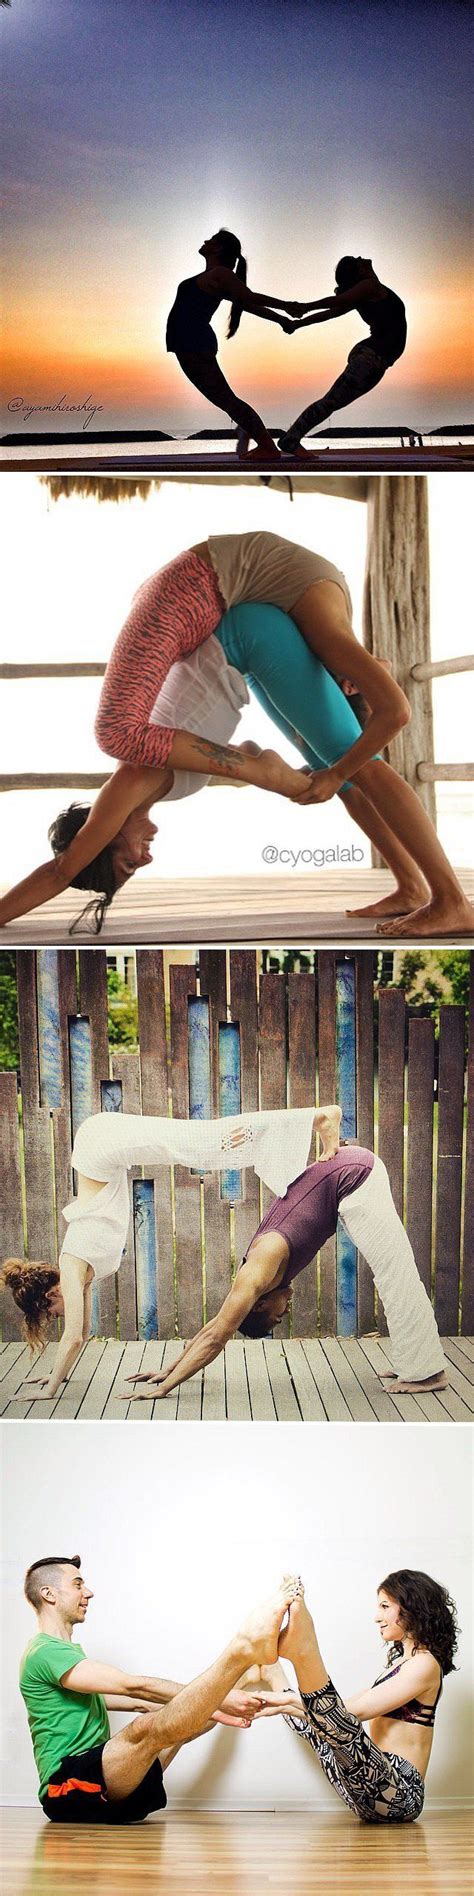 Practicing these partner yoga poses is a perfect way to strengthen your mind, body, and. Partner Yoga Poses For Friends and Lovers | Partner yoga poses, Partner yoga, Couples yoga